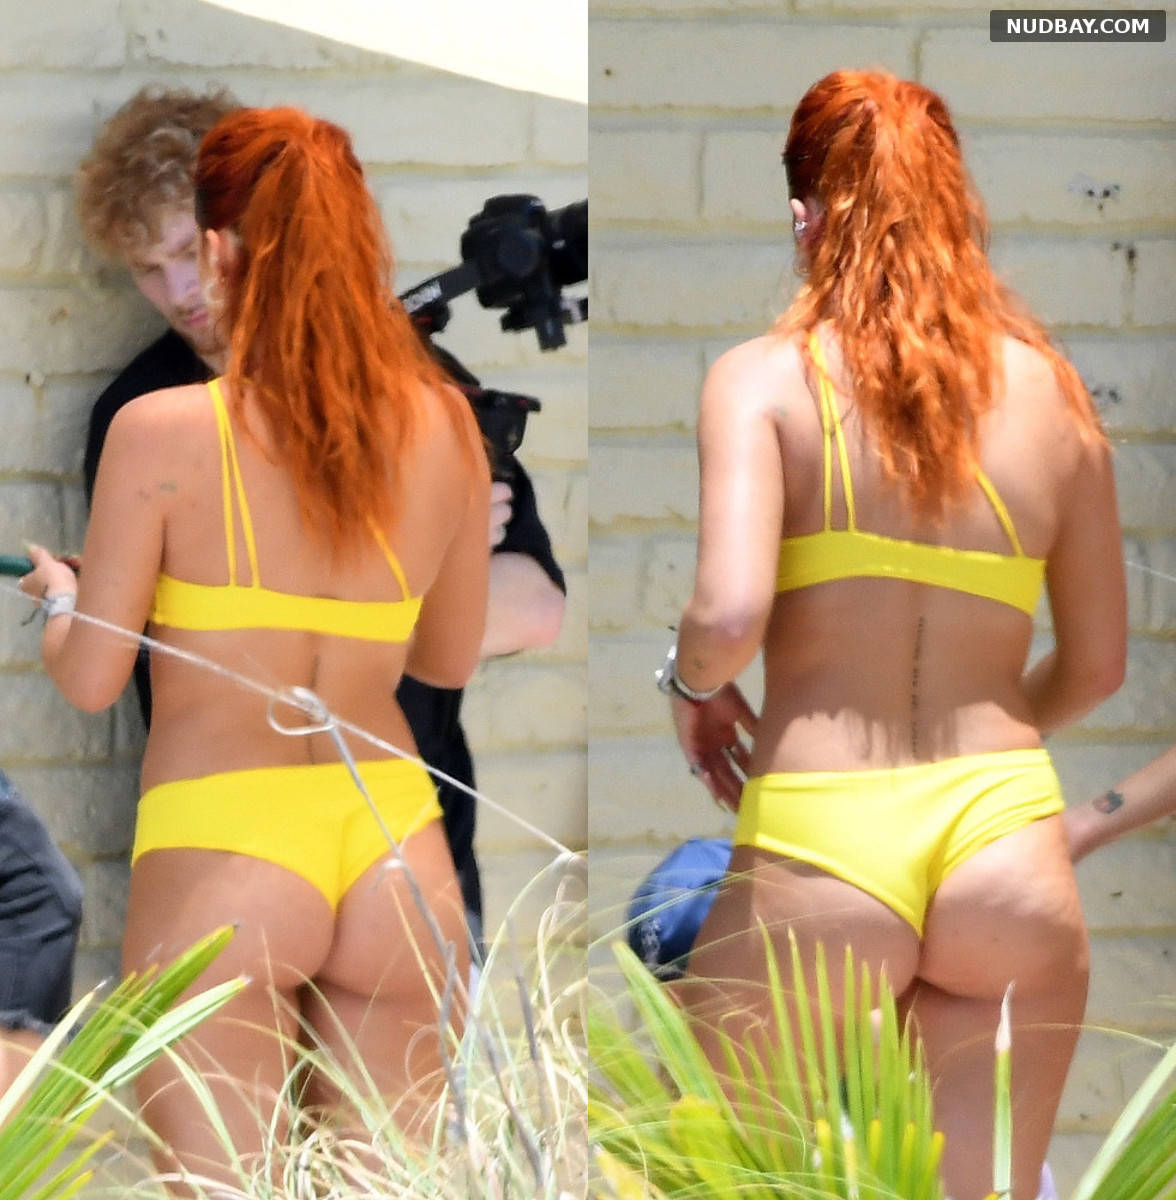 Bella Thorne Wears a white and yellow during a photoshoot on the beach in Miami